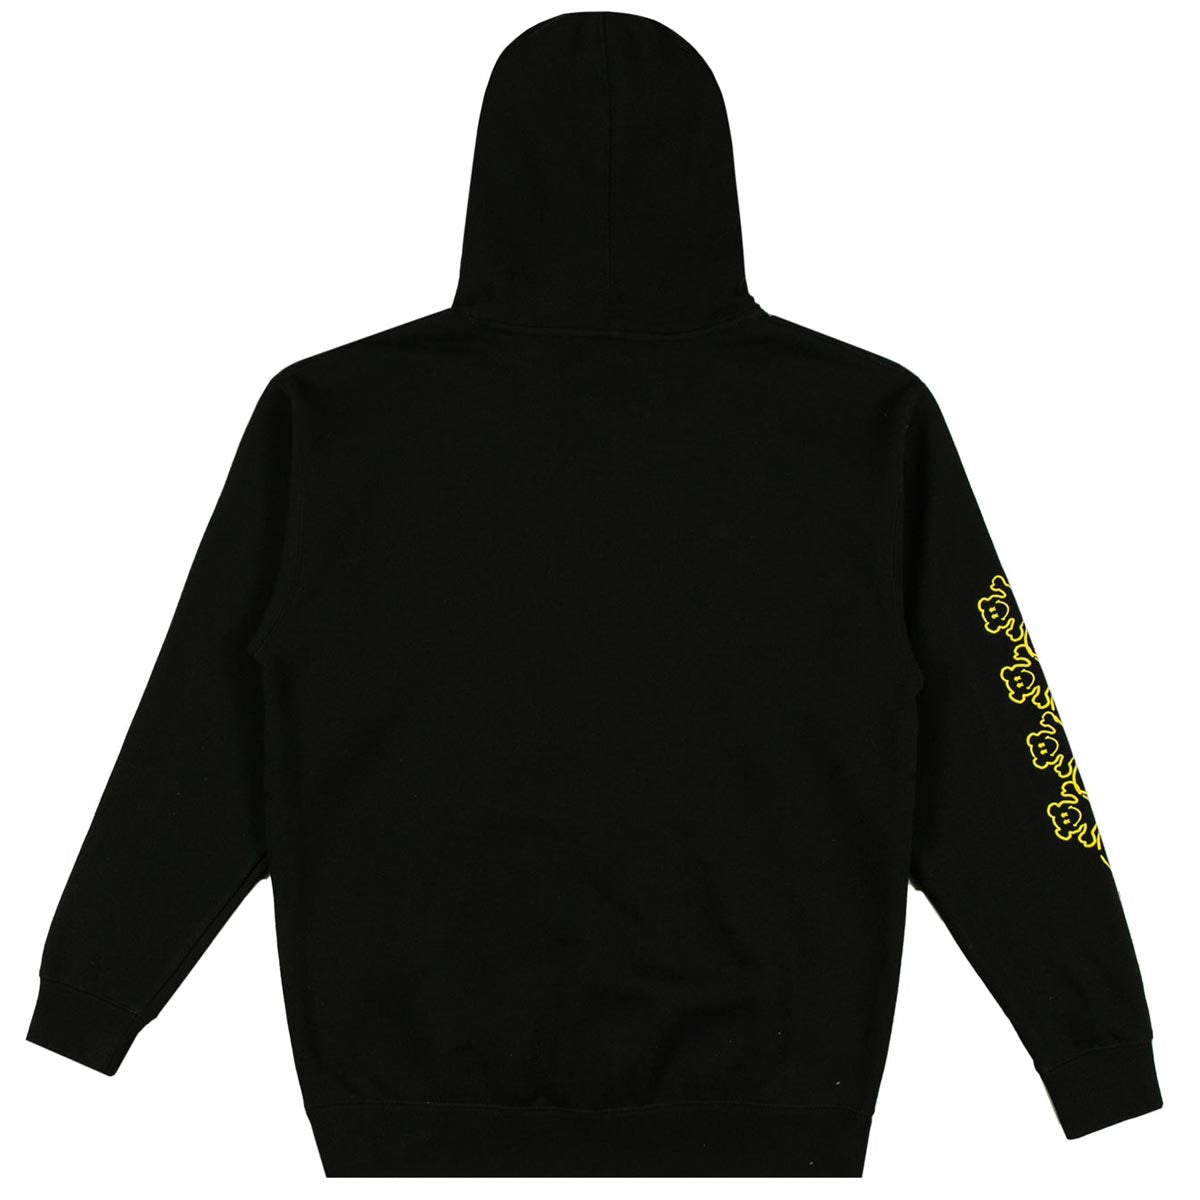 Grizzly x Smiley World Big Smile Hoodie - Black image 3